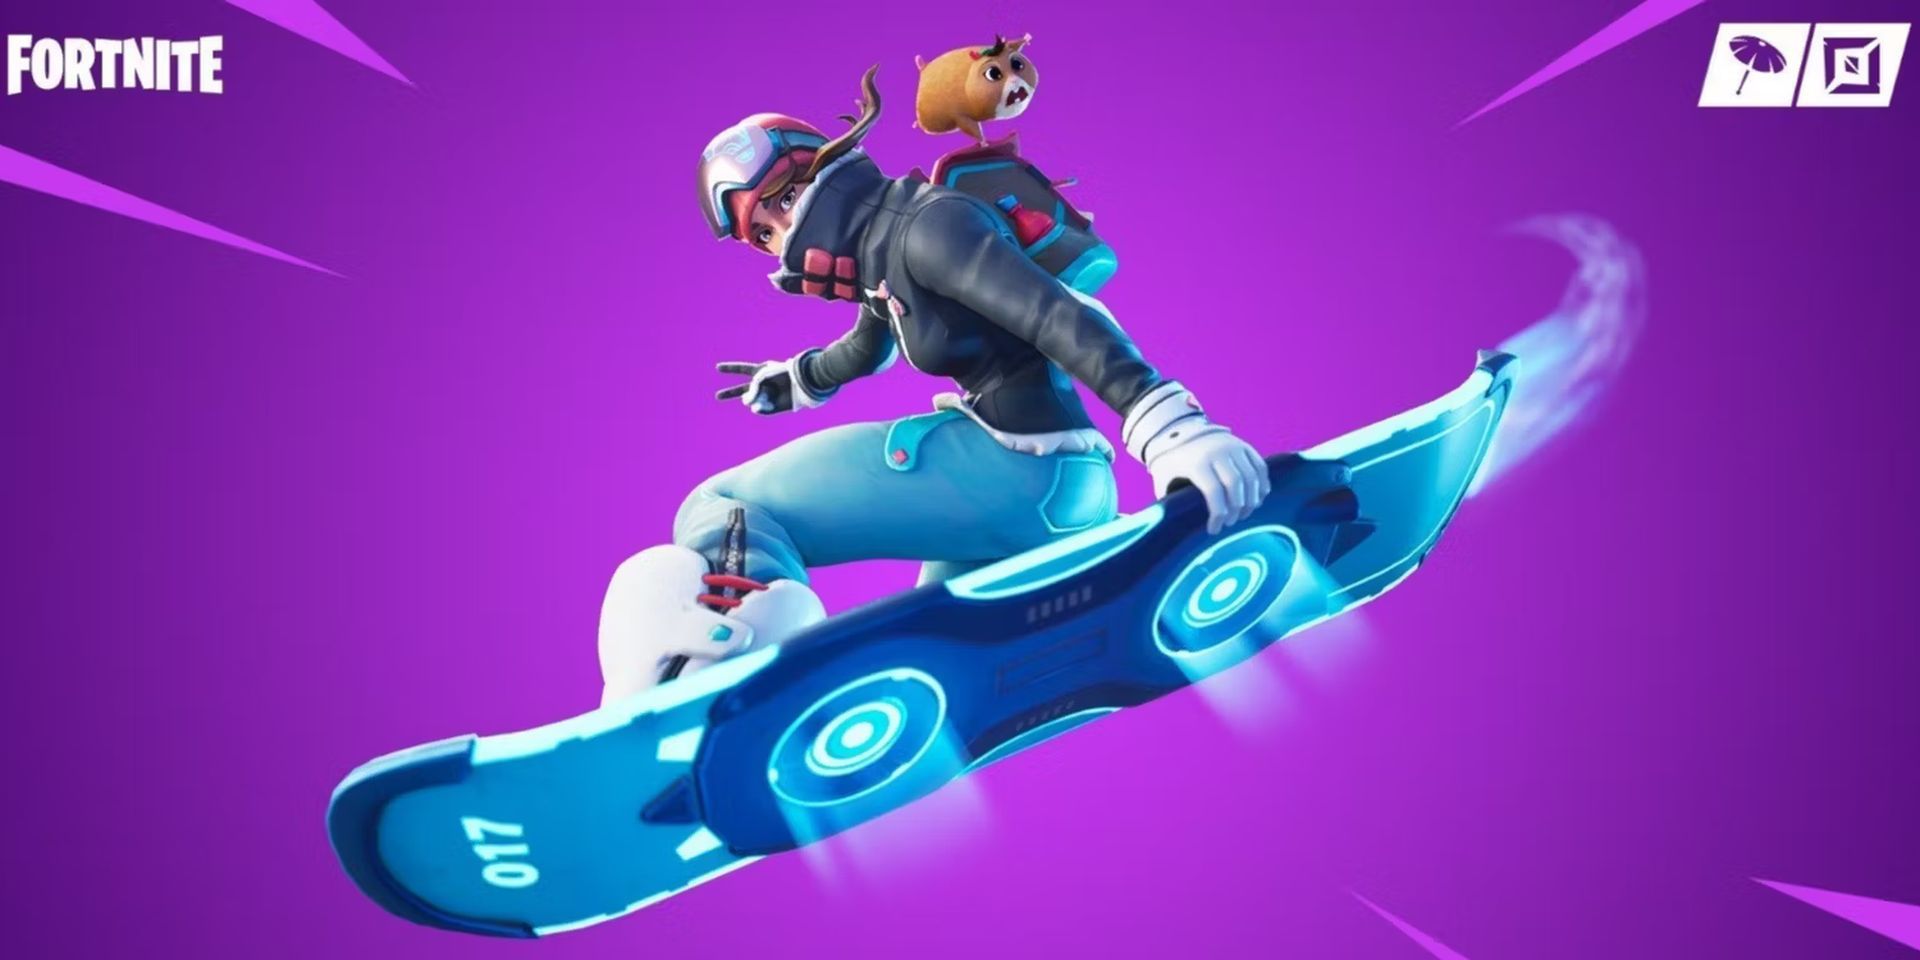 Fortnite hoverboard is now Driftboard